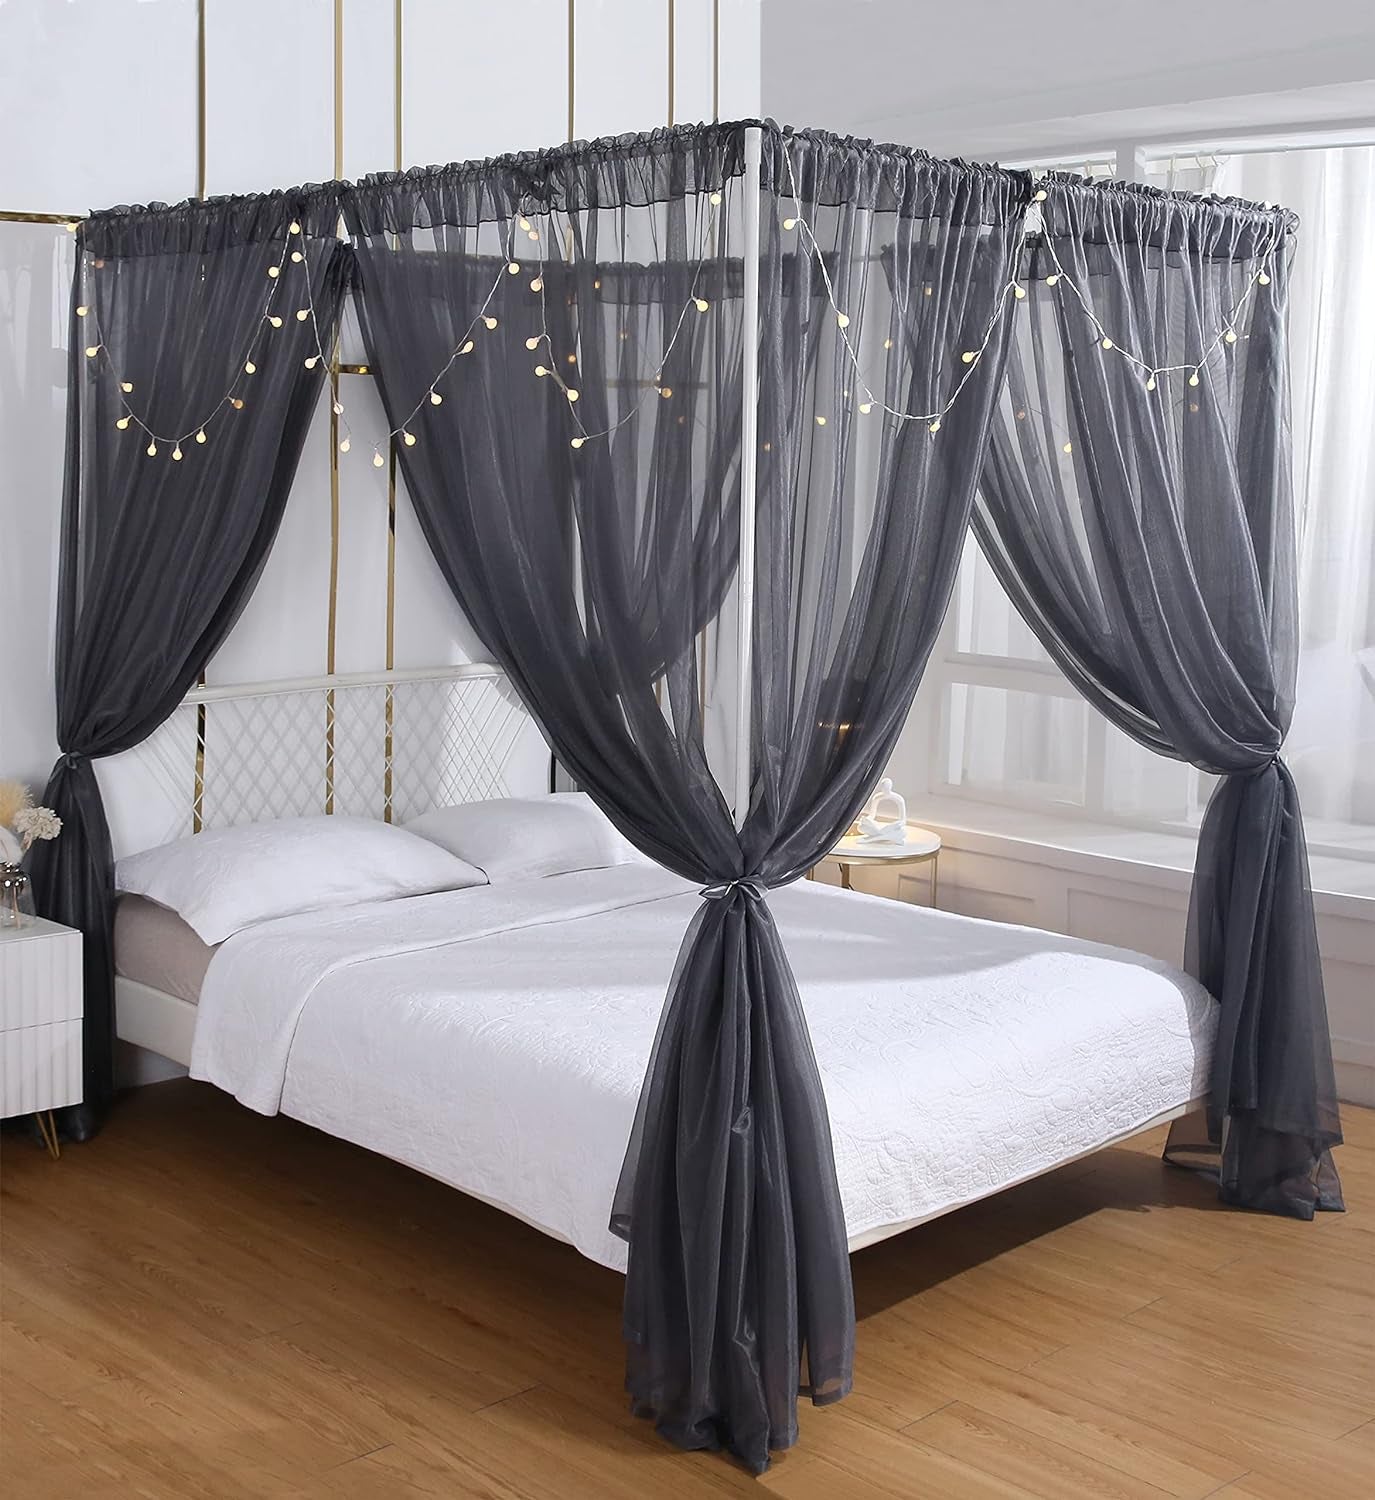 Akiky Princess Canopy Bed Curtains Bed Canopy Curtains with Lights for Queen Size Bed Drapes,8 Panels Canopies with 2 Lights,Room Décor (Full/Queen, White)  Akiky Grey Full/Queen 